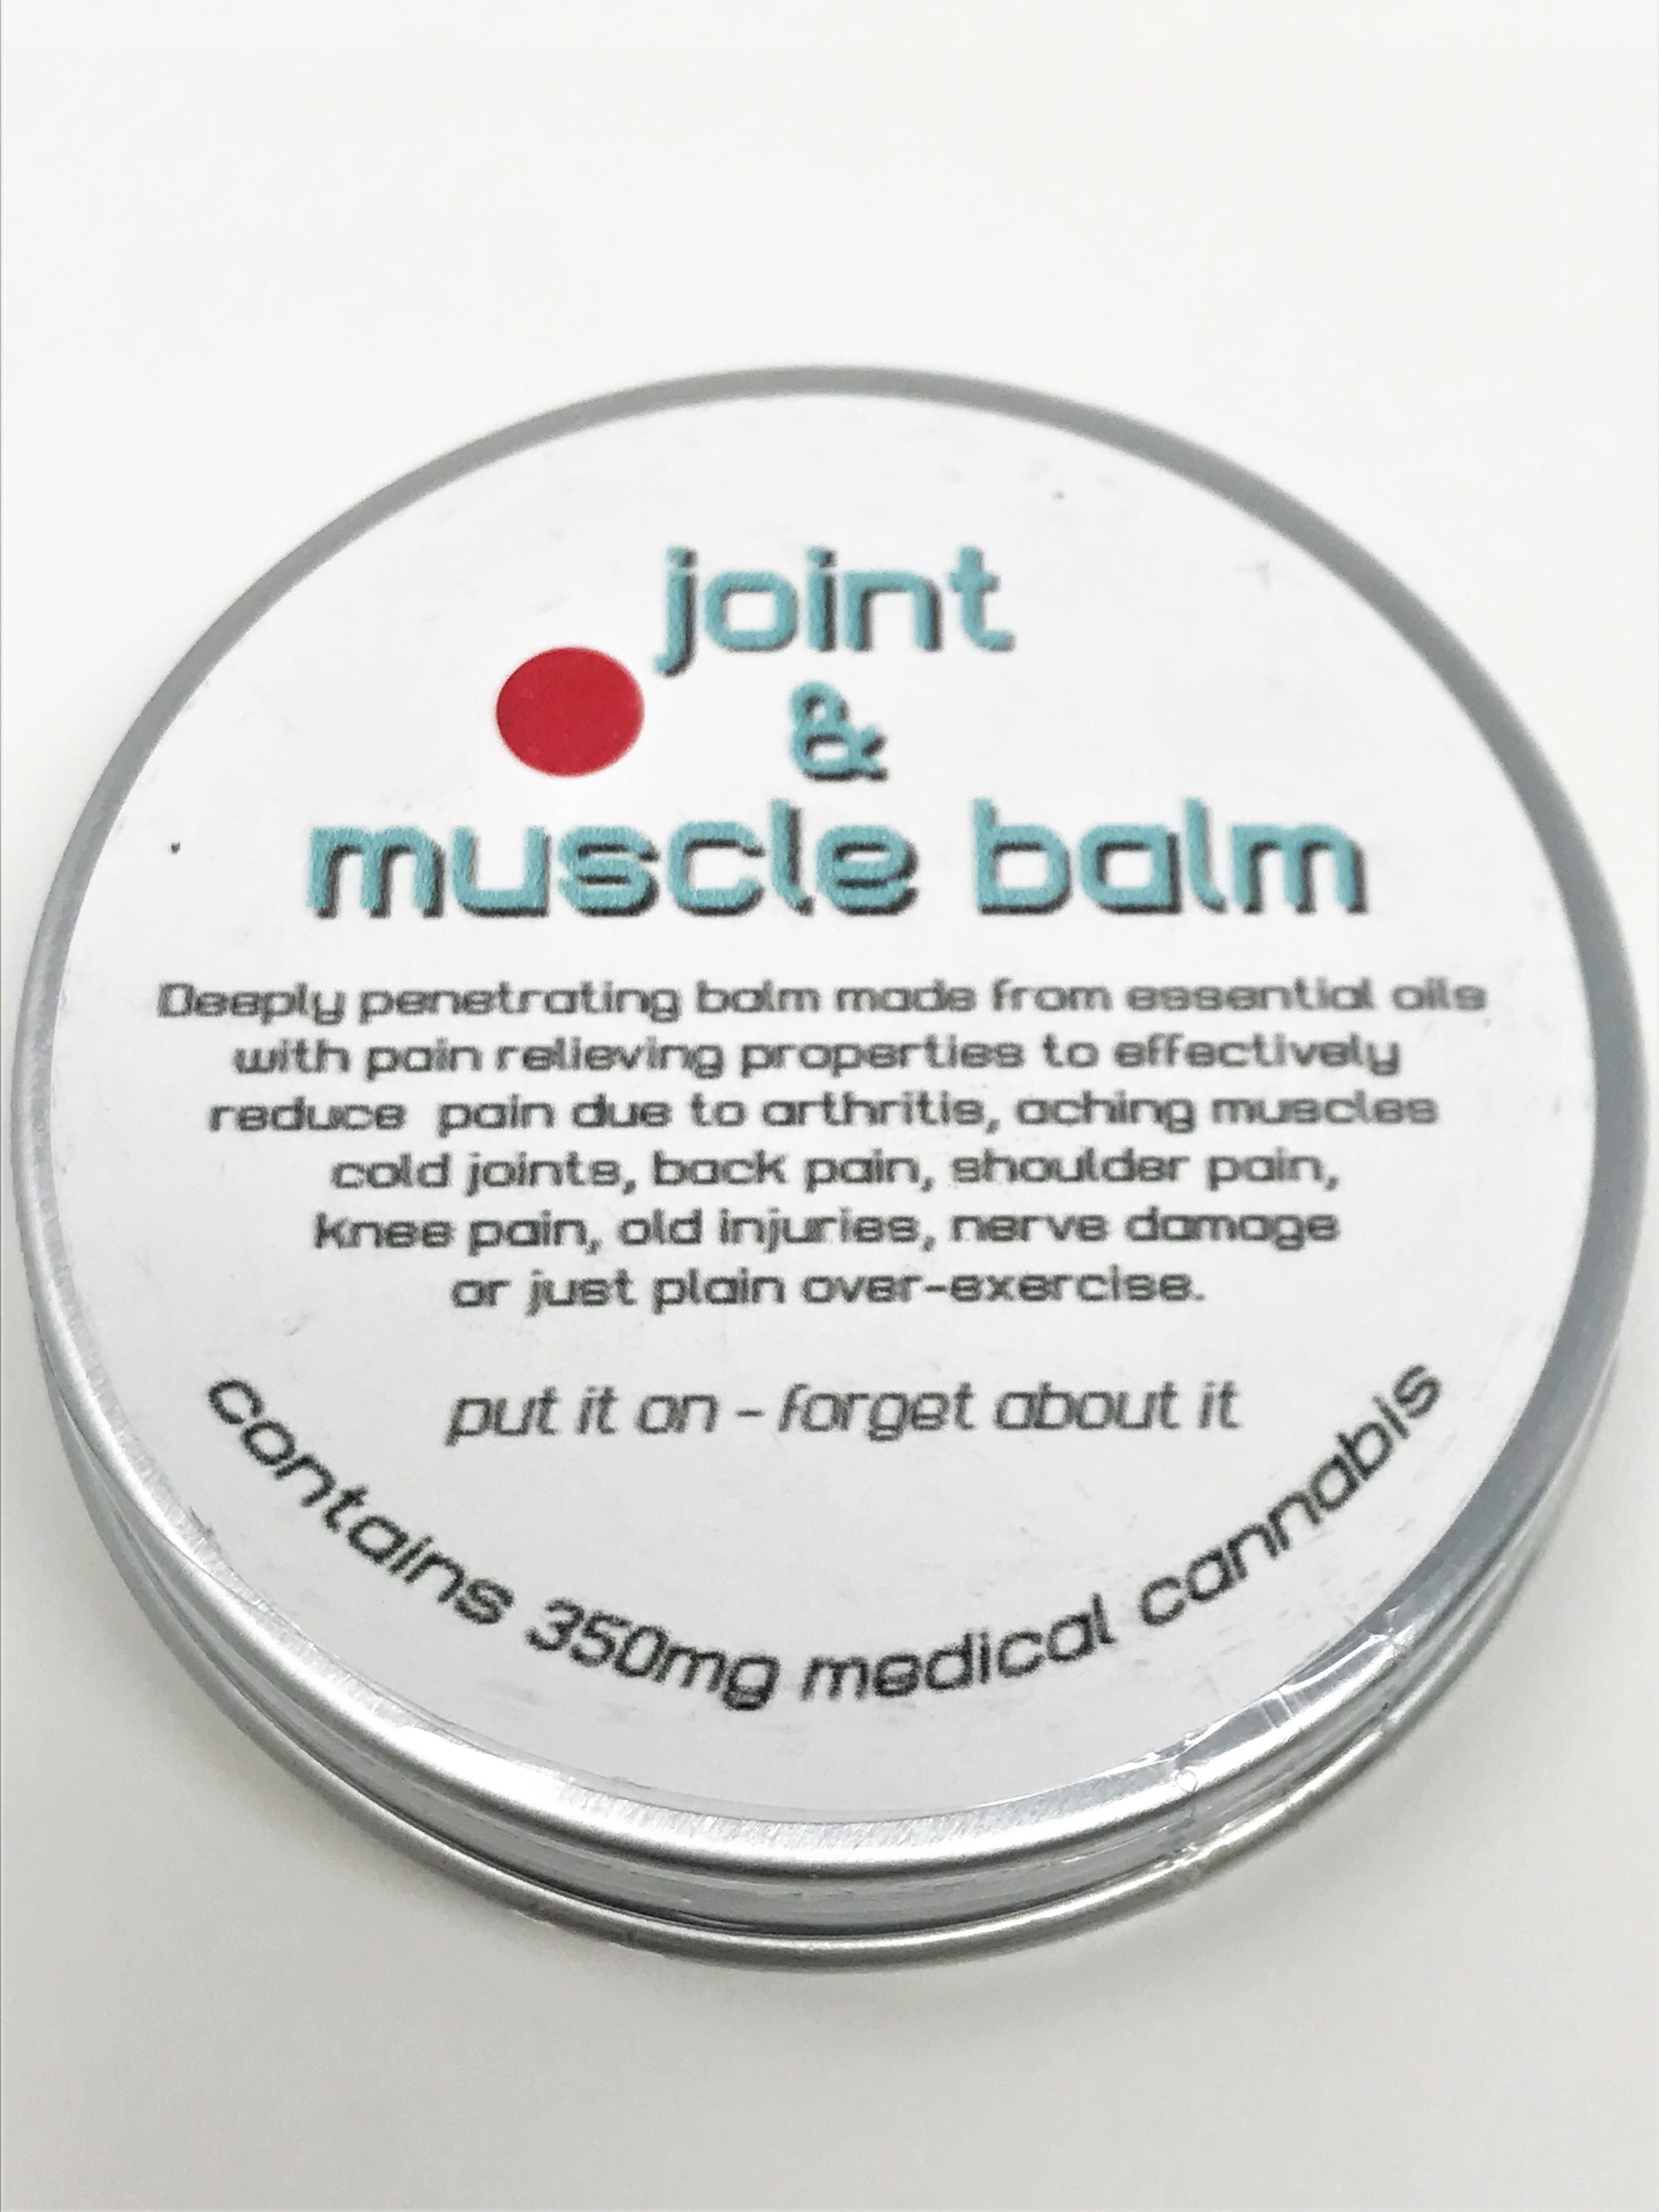 topicals-akasha-care-extra-strength-joint-a-muscle-balm-350mg